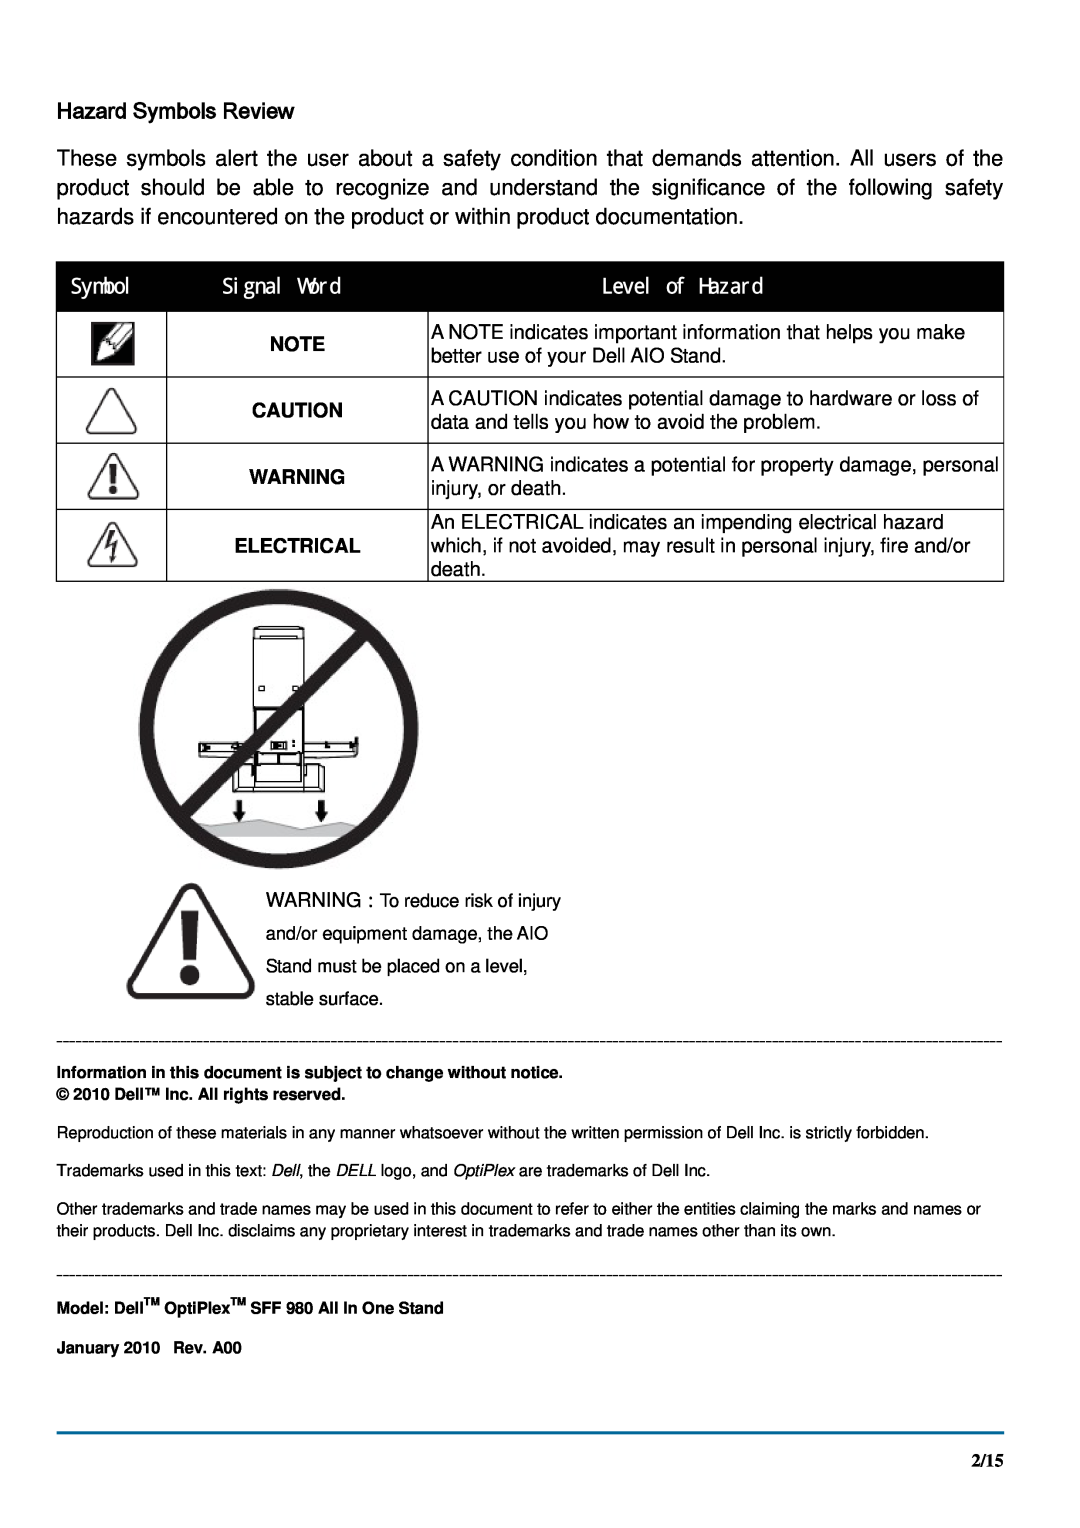 Dell SFF 980 manual Hazard Symbols Review, Electrical, Signal Word, Level of Hazard 